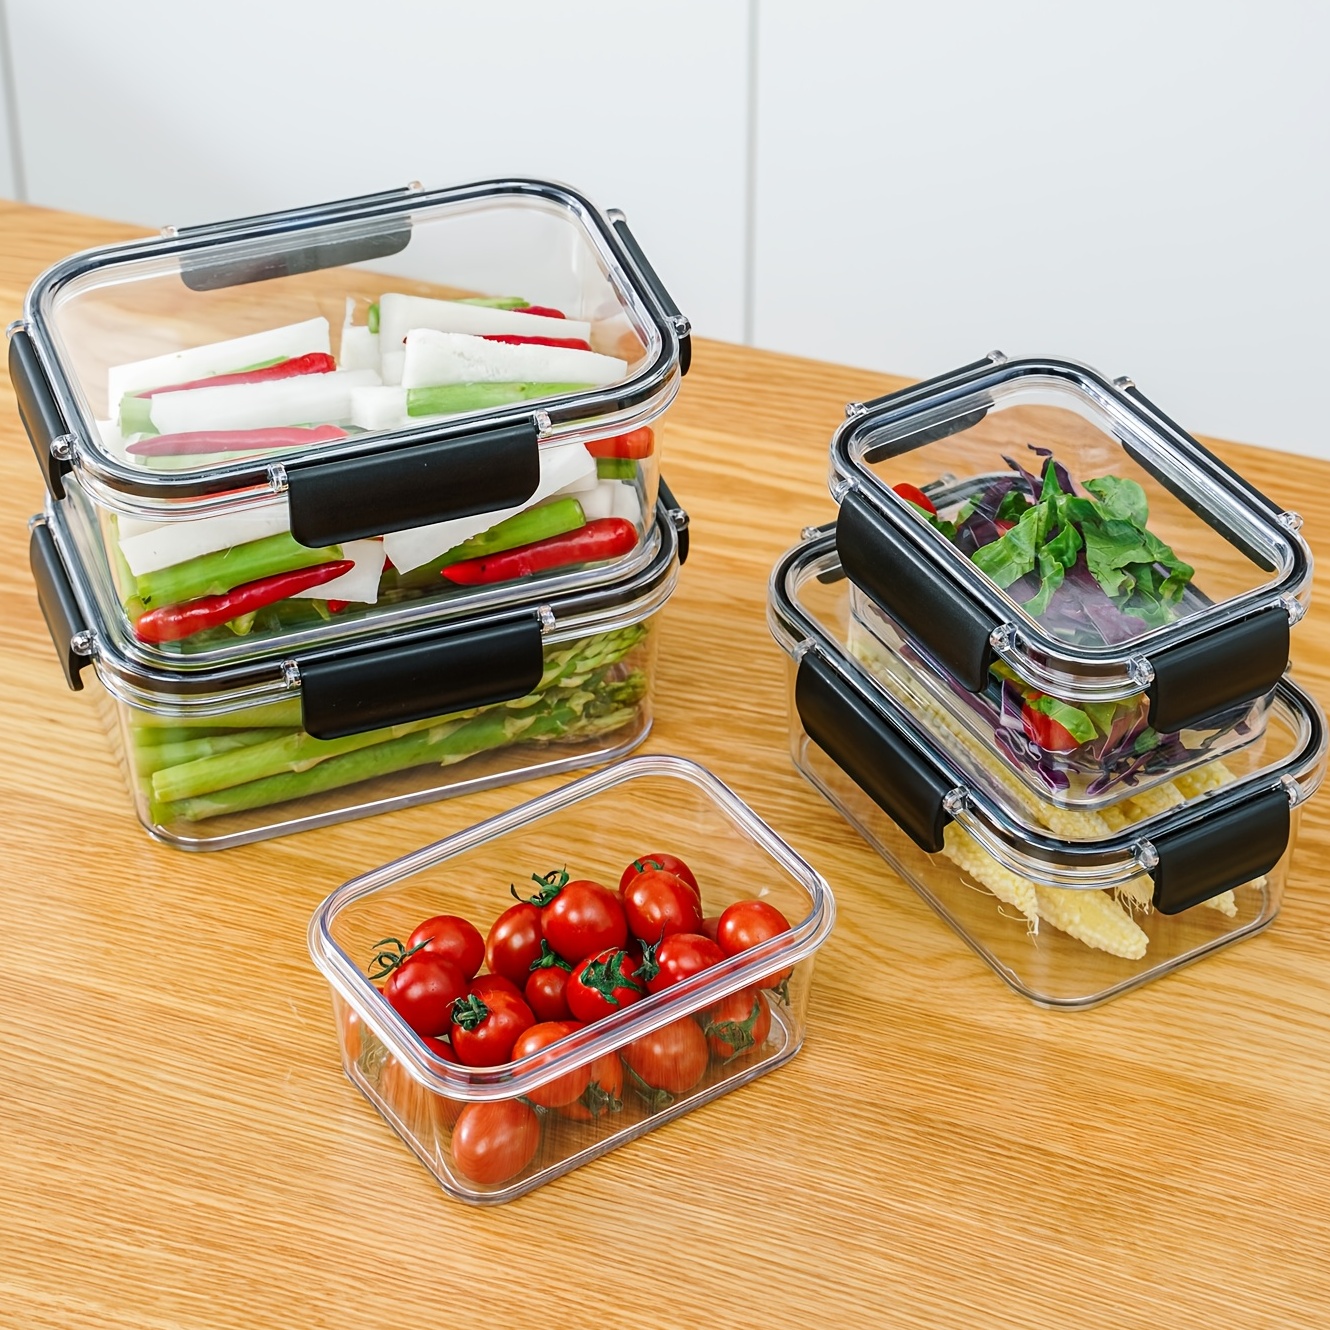 Stainless Steel Food Storage Containers, Leak Proof & Airtight Lids